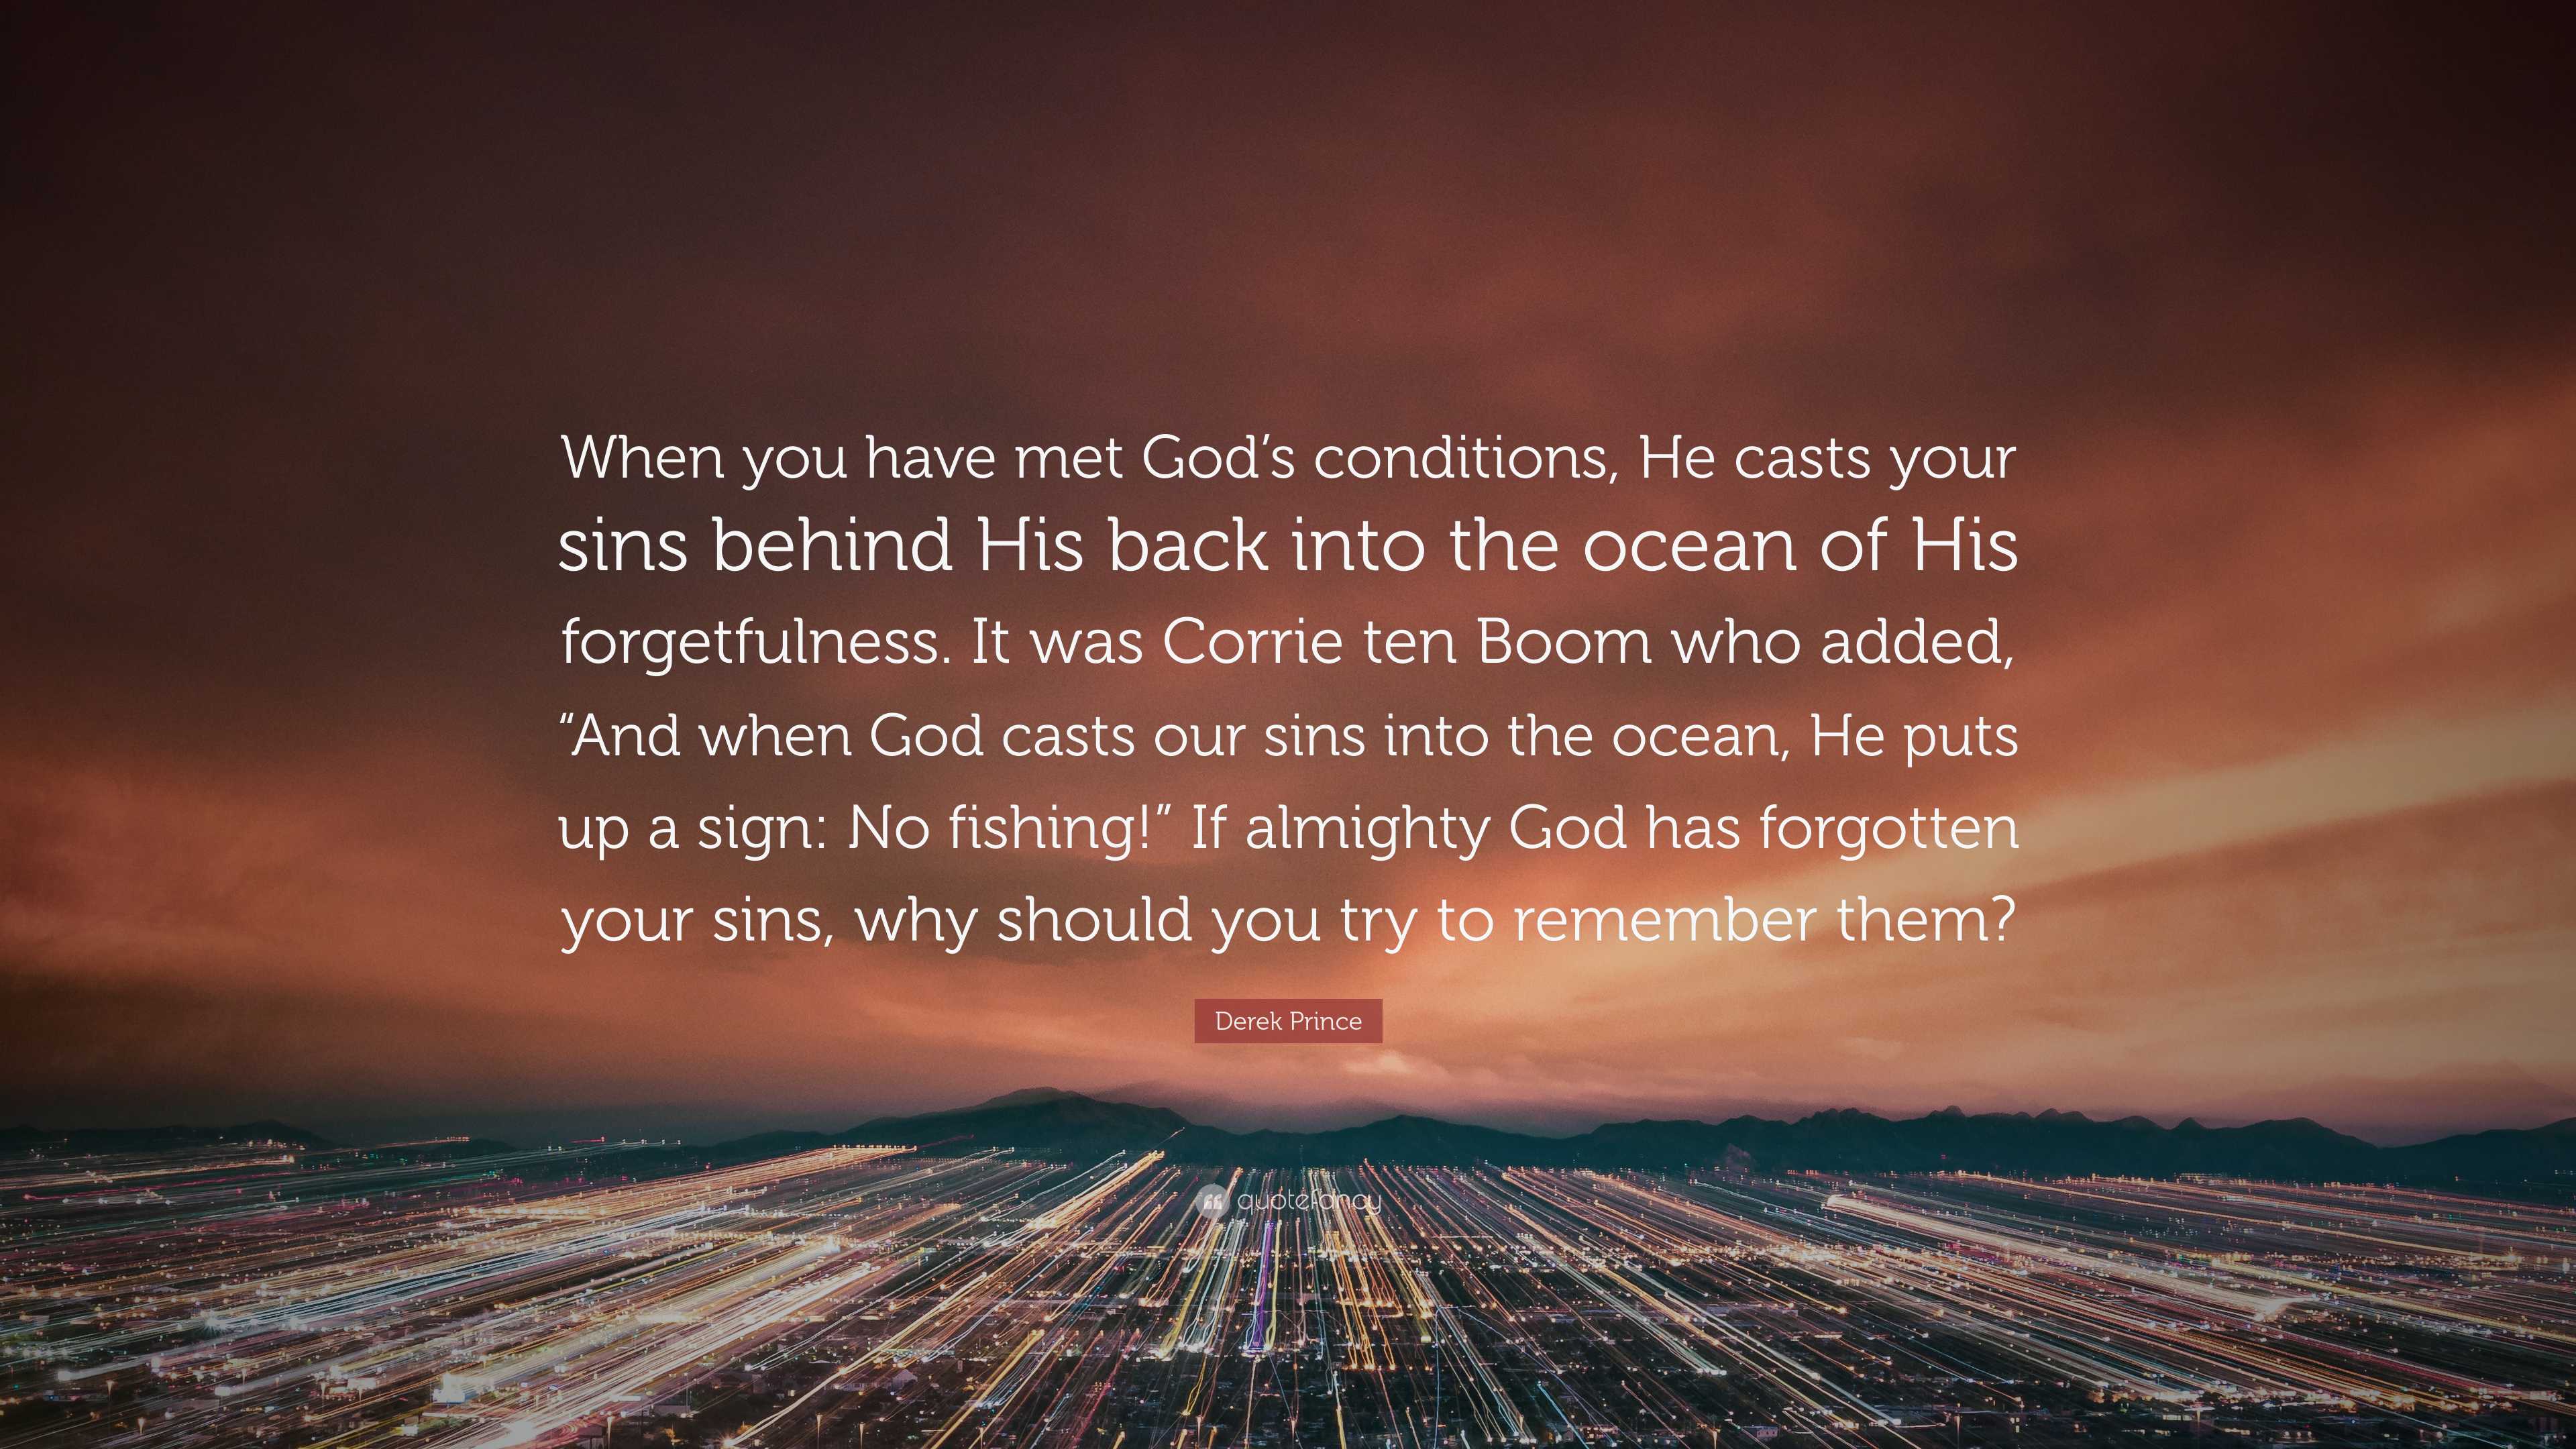 Derek Prince Quote: “When you have met God's conditions, He casts